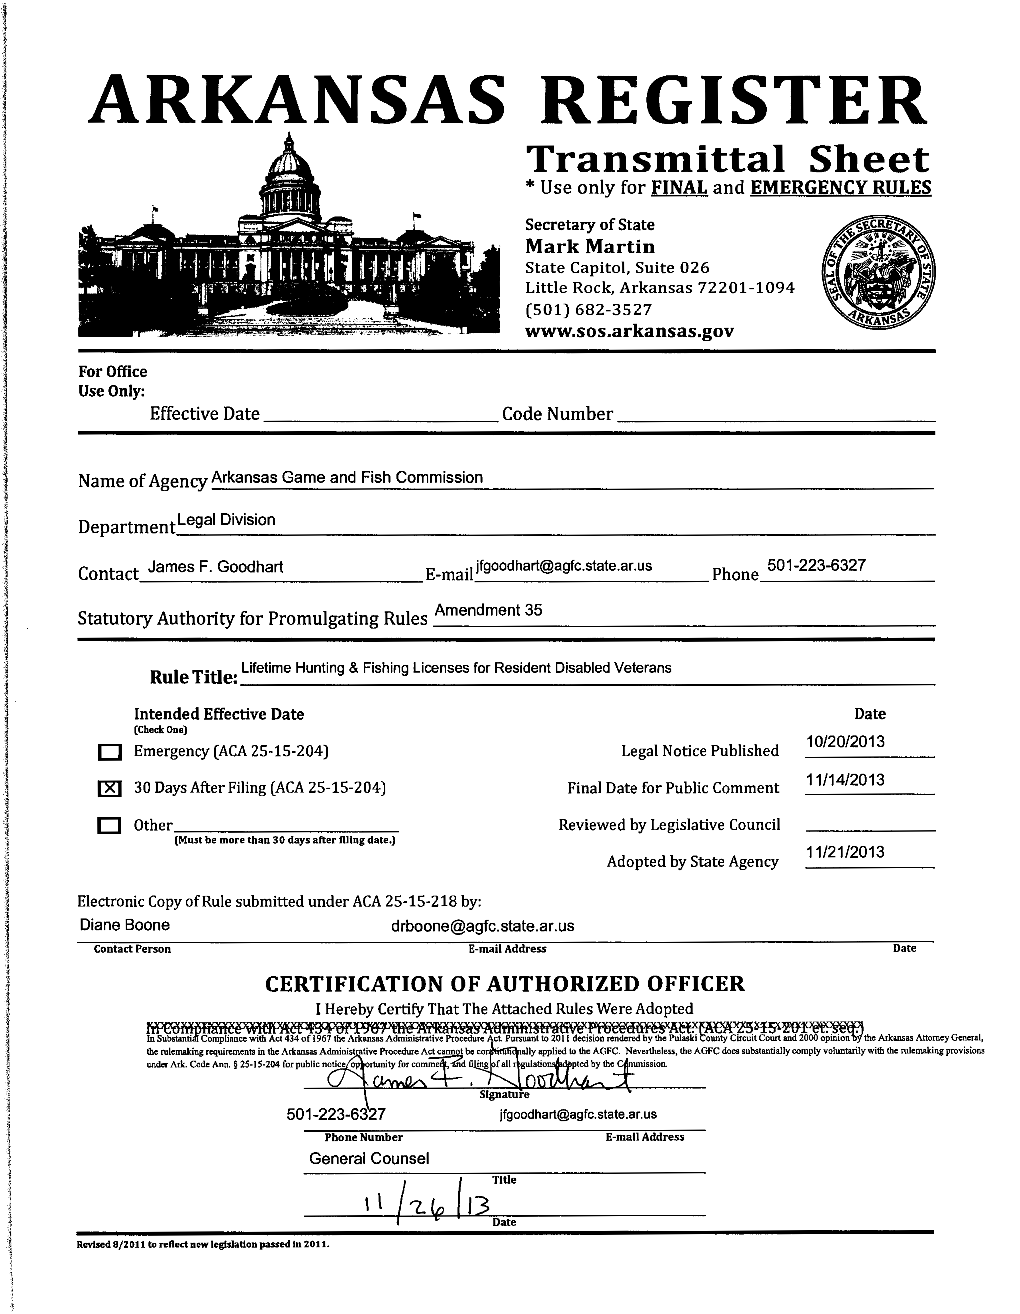 ARKANSAS REGISTER Transmittal Sheet *Use Only for FINAL and EMERGENCY RULES